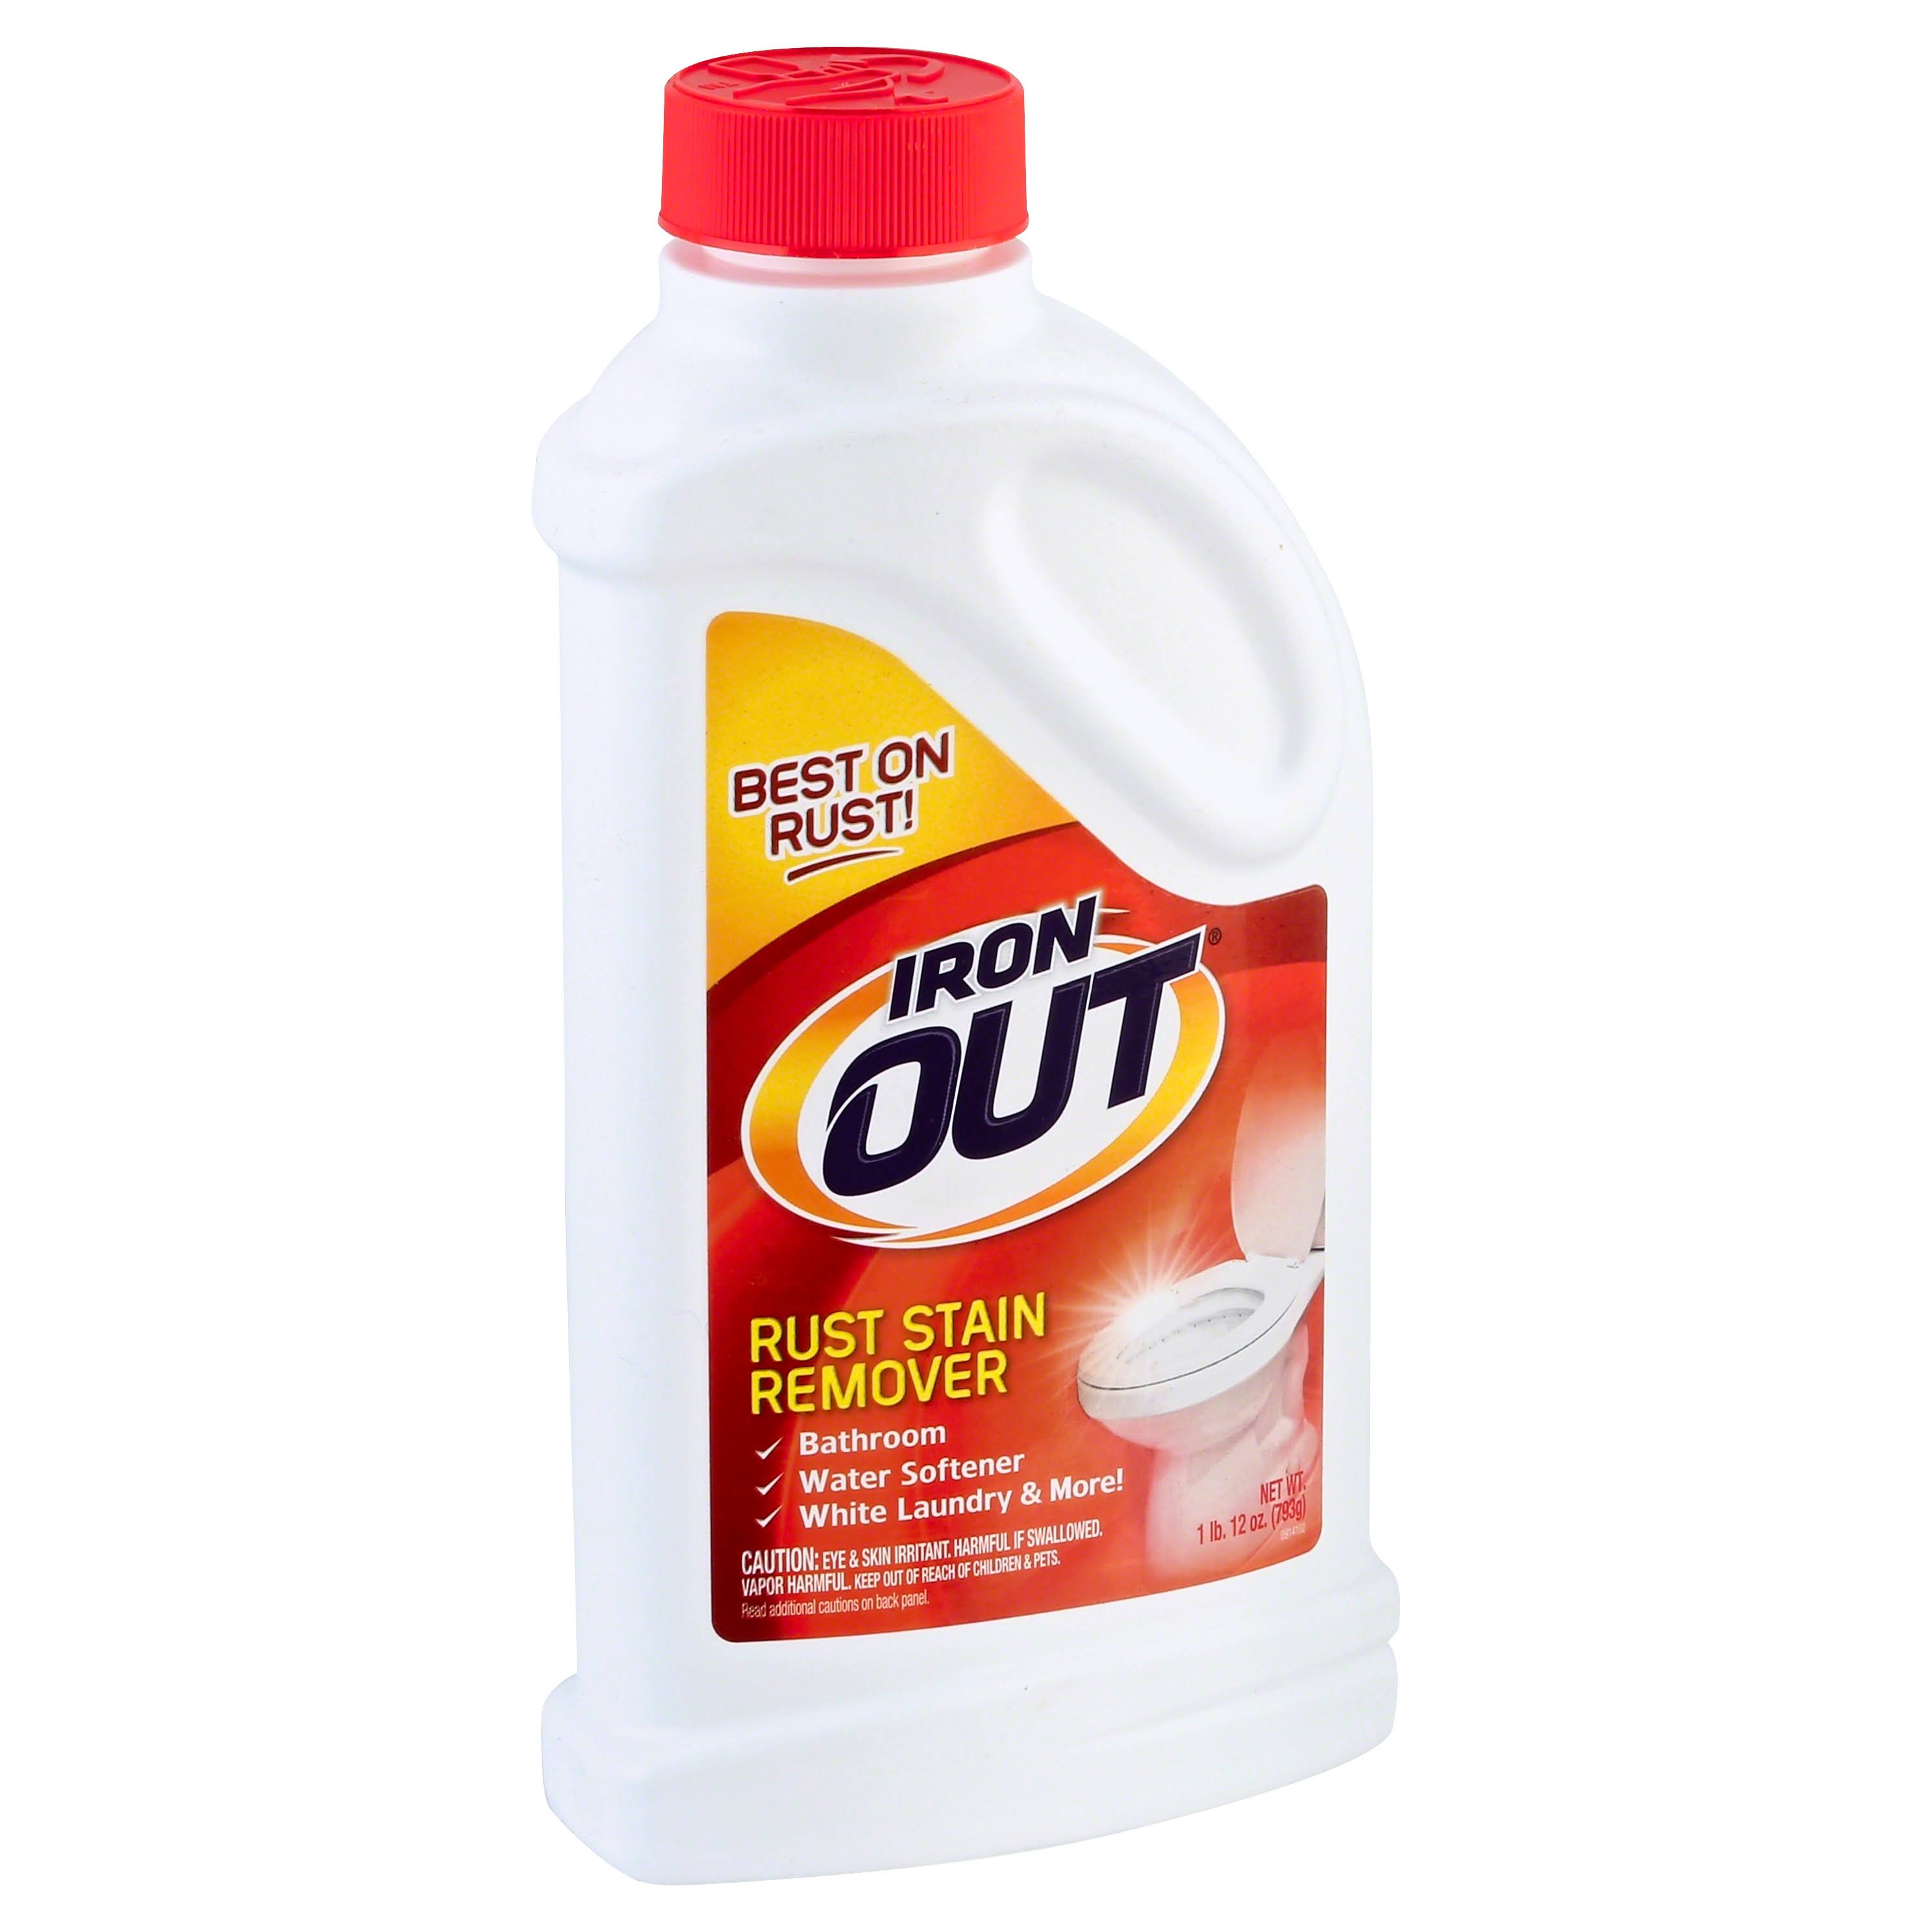 Iron Out Rust Stain Remover - 12 oz